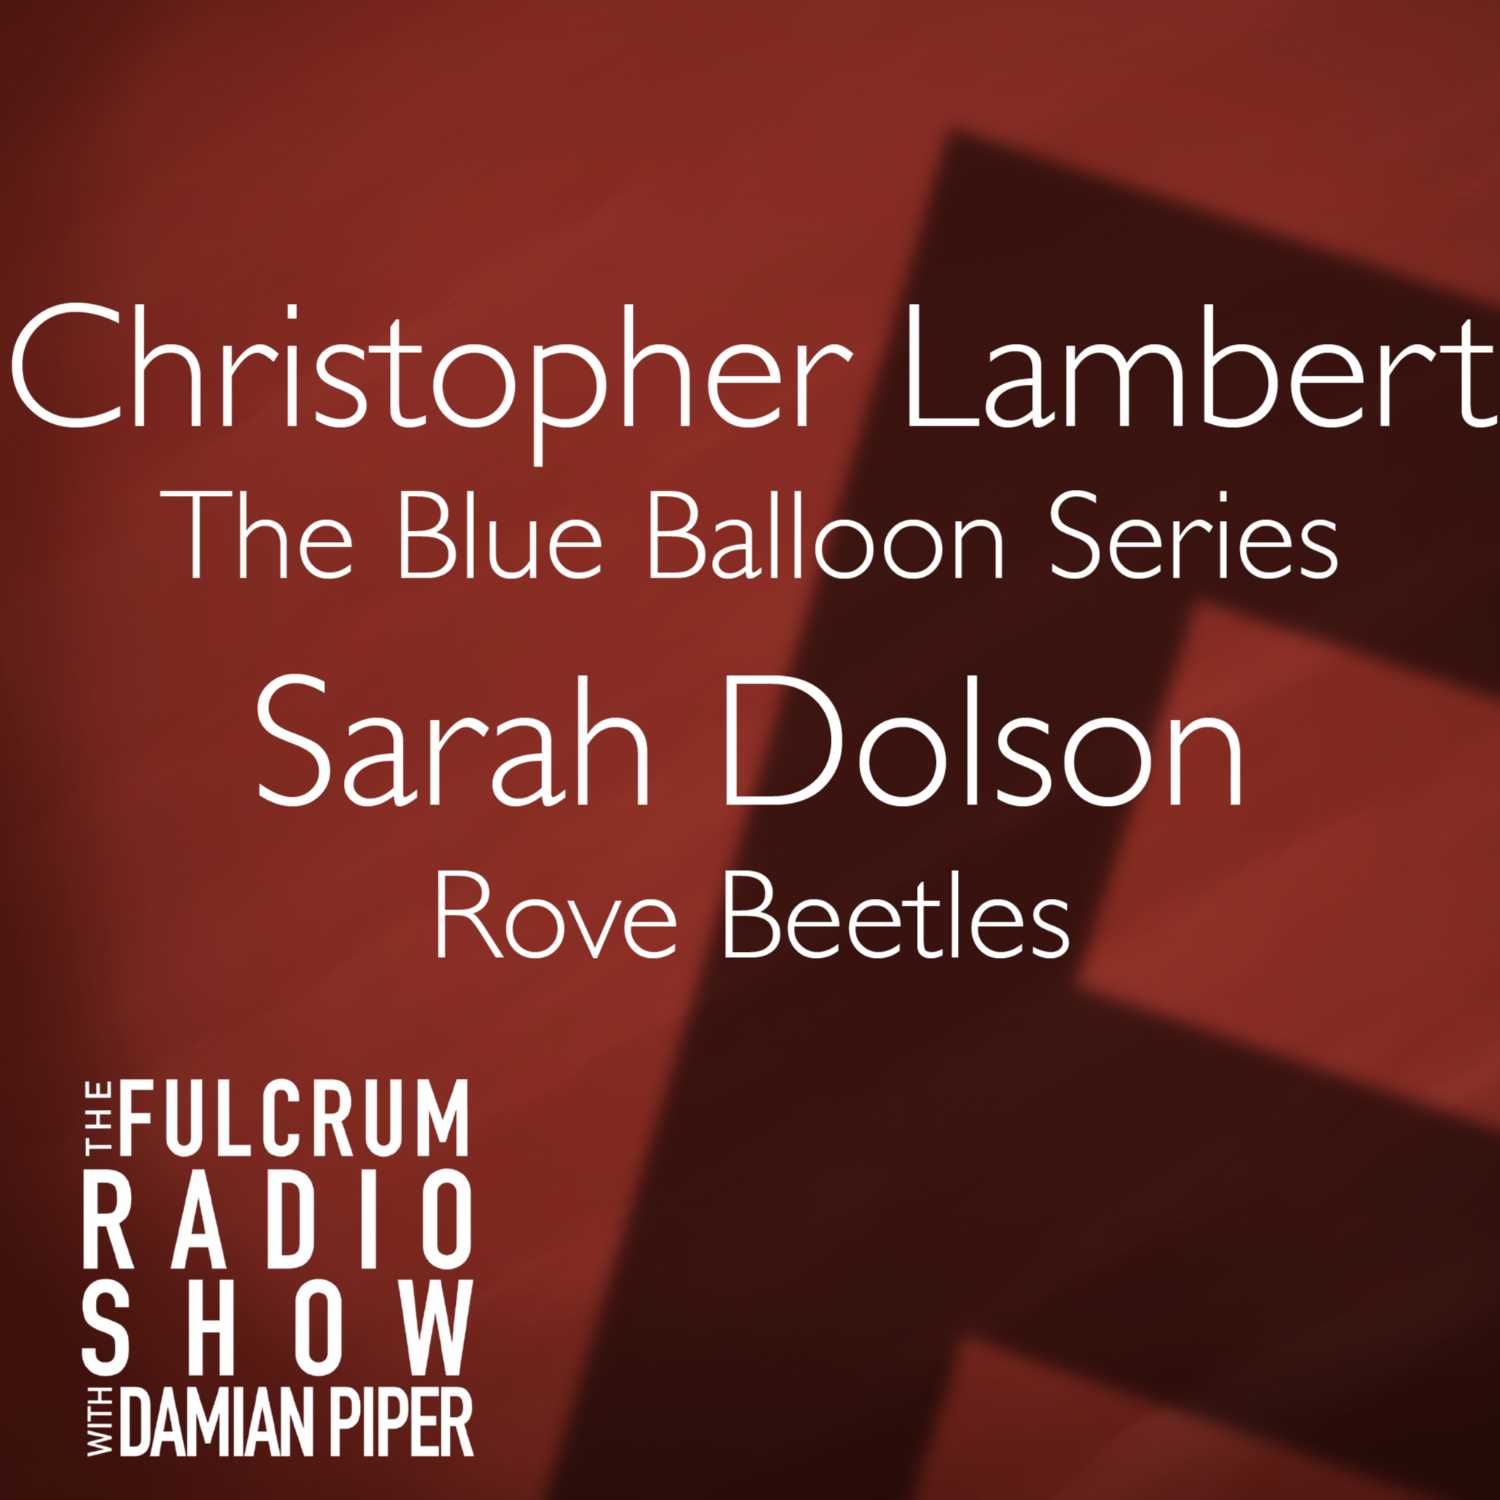 Episode 15 THE FINALE: Christopher Lambert, The Blue Balloon series; Sarah Dolson on Rove Beetles